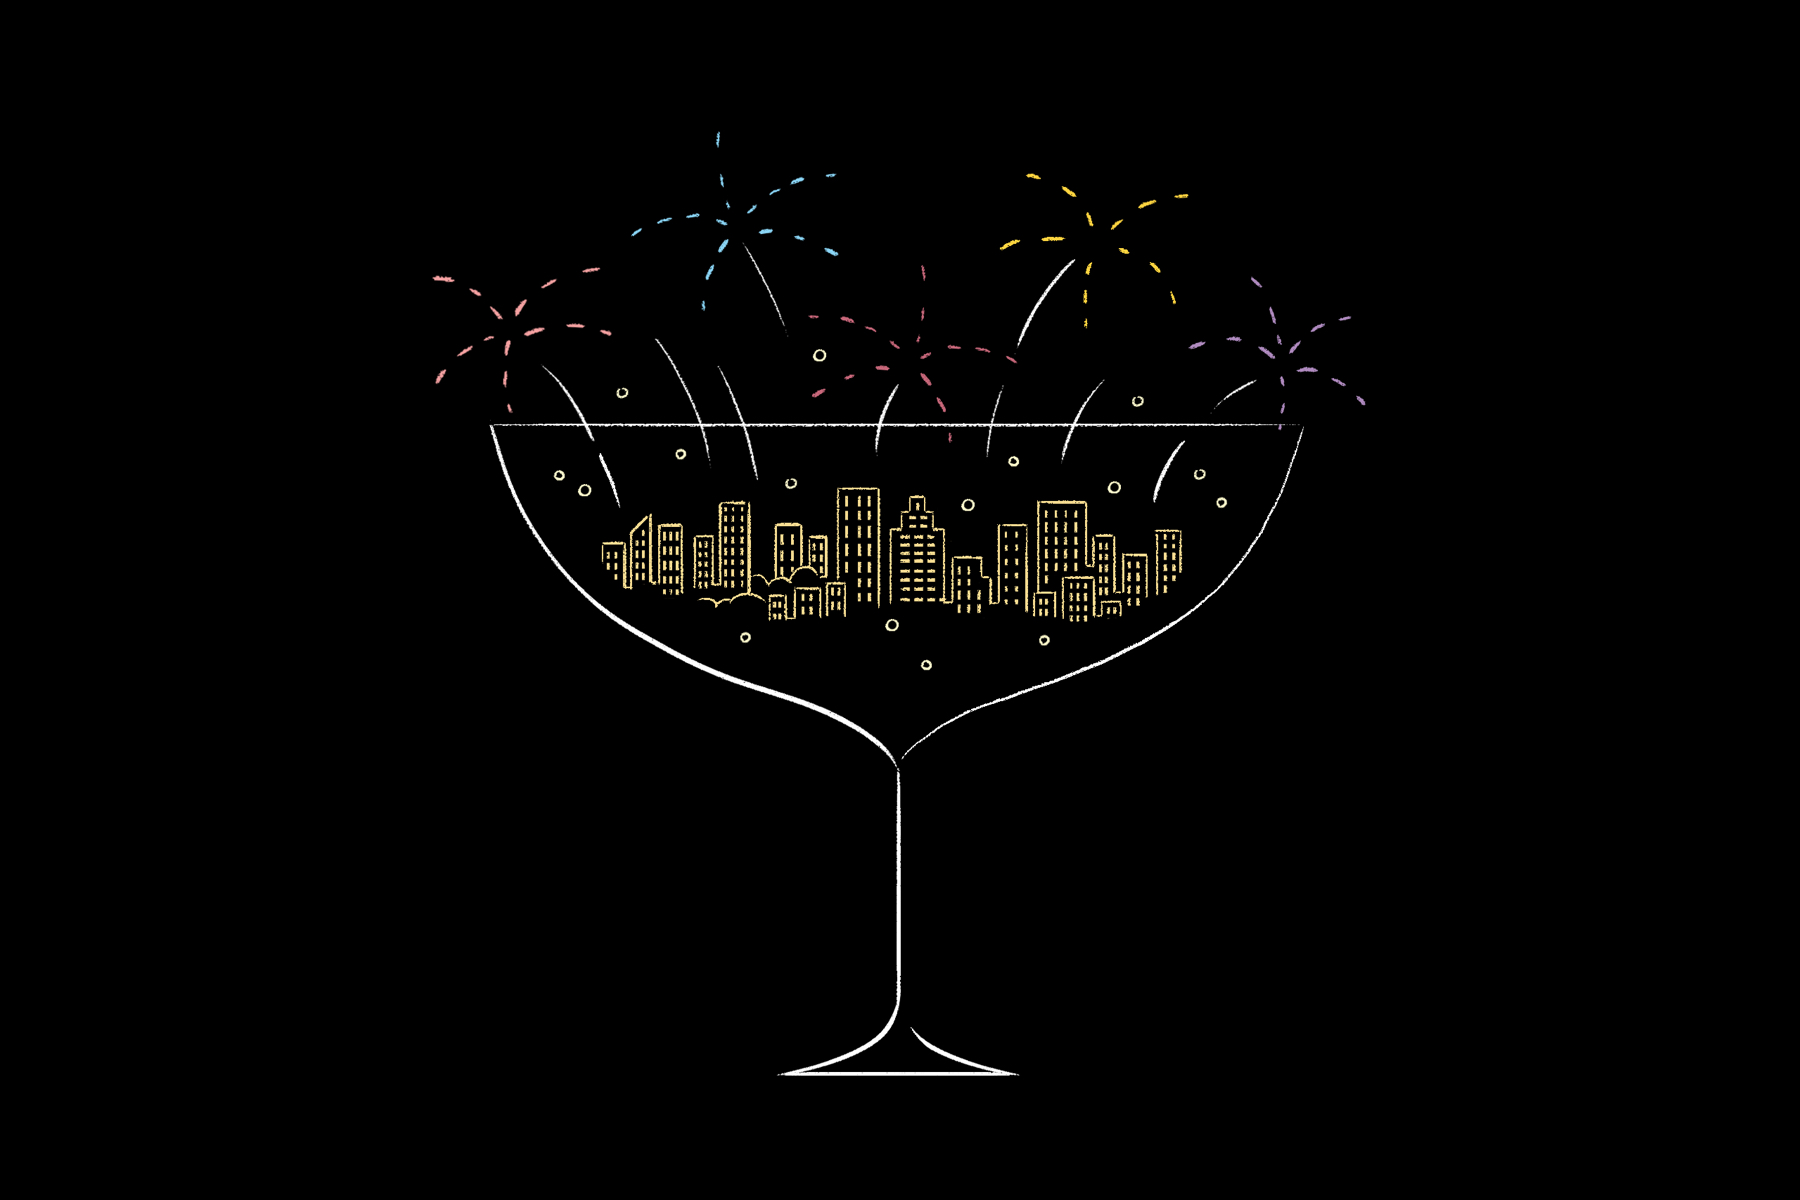 New Year's greetings and messages to ring in 2021 featuring a cityscape in a champagne coupe illustration from Paperless Post